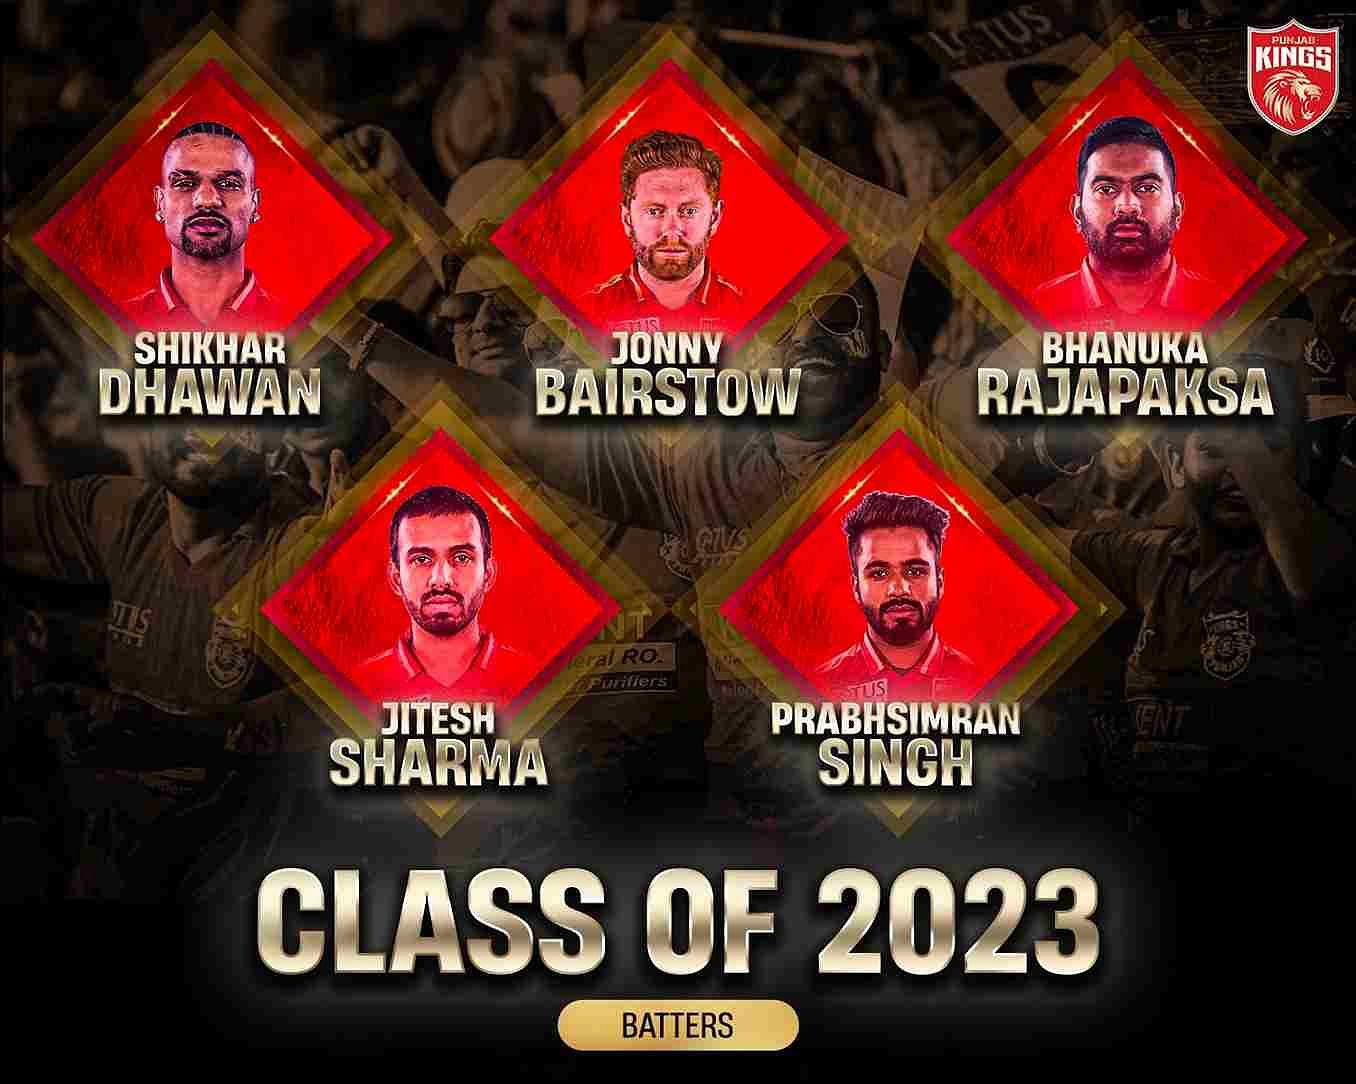 IPL 2024 Auction Live Updates: full players list, updated squads, base  price, purse left and slots available